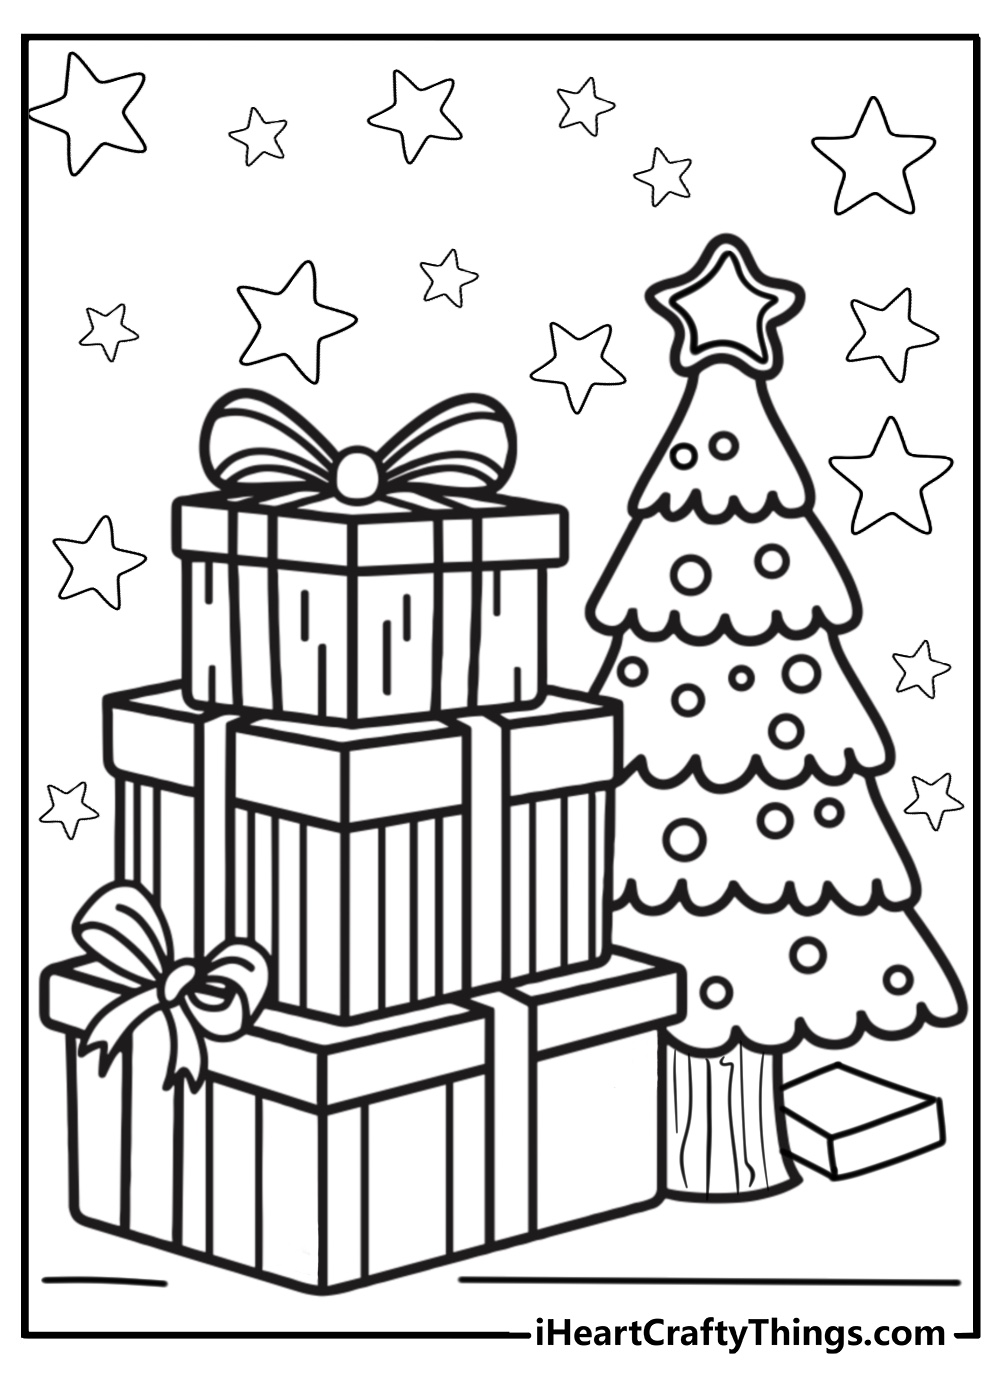 Presents coloring pages for christmas